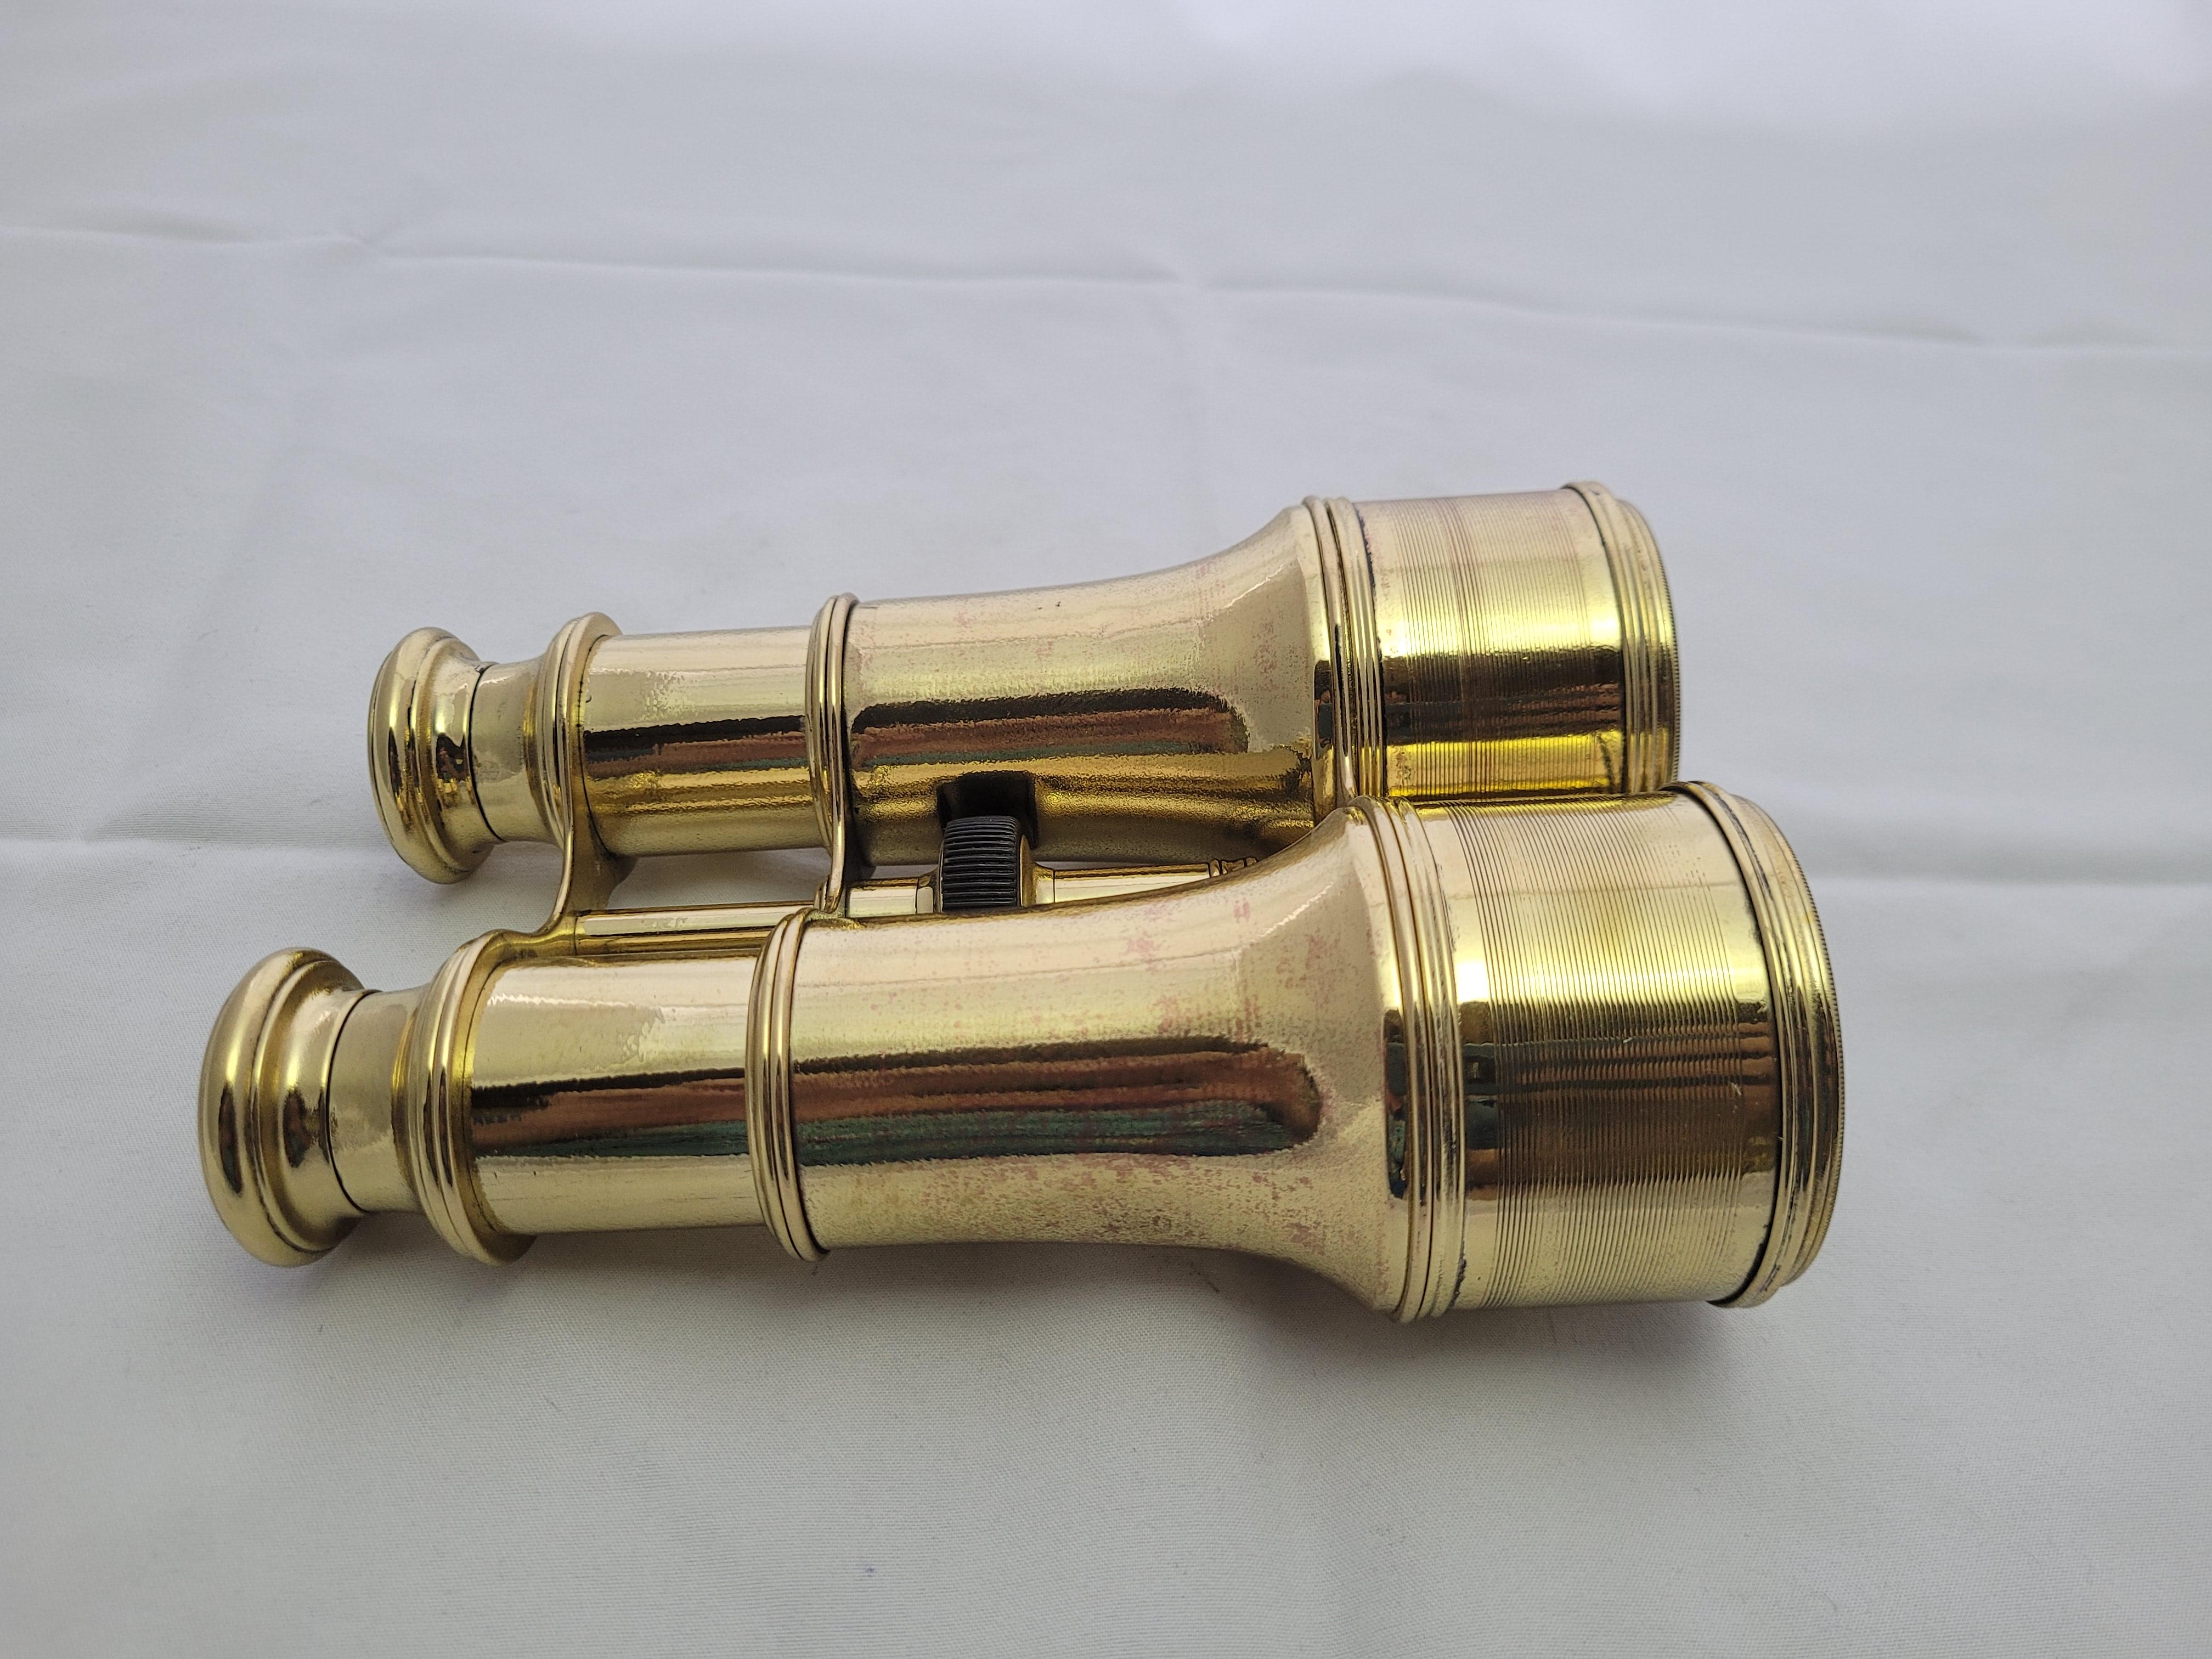 French Yachting Binoculars by Lemaire Fabt. Paris 1